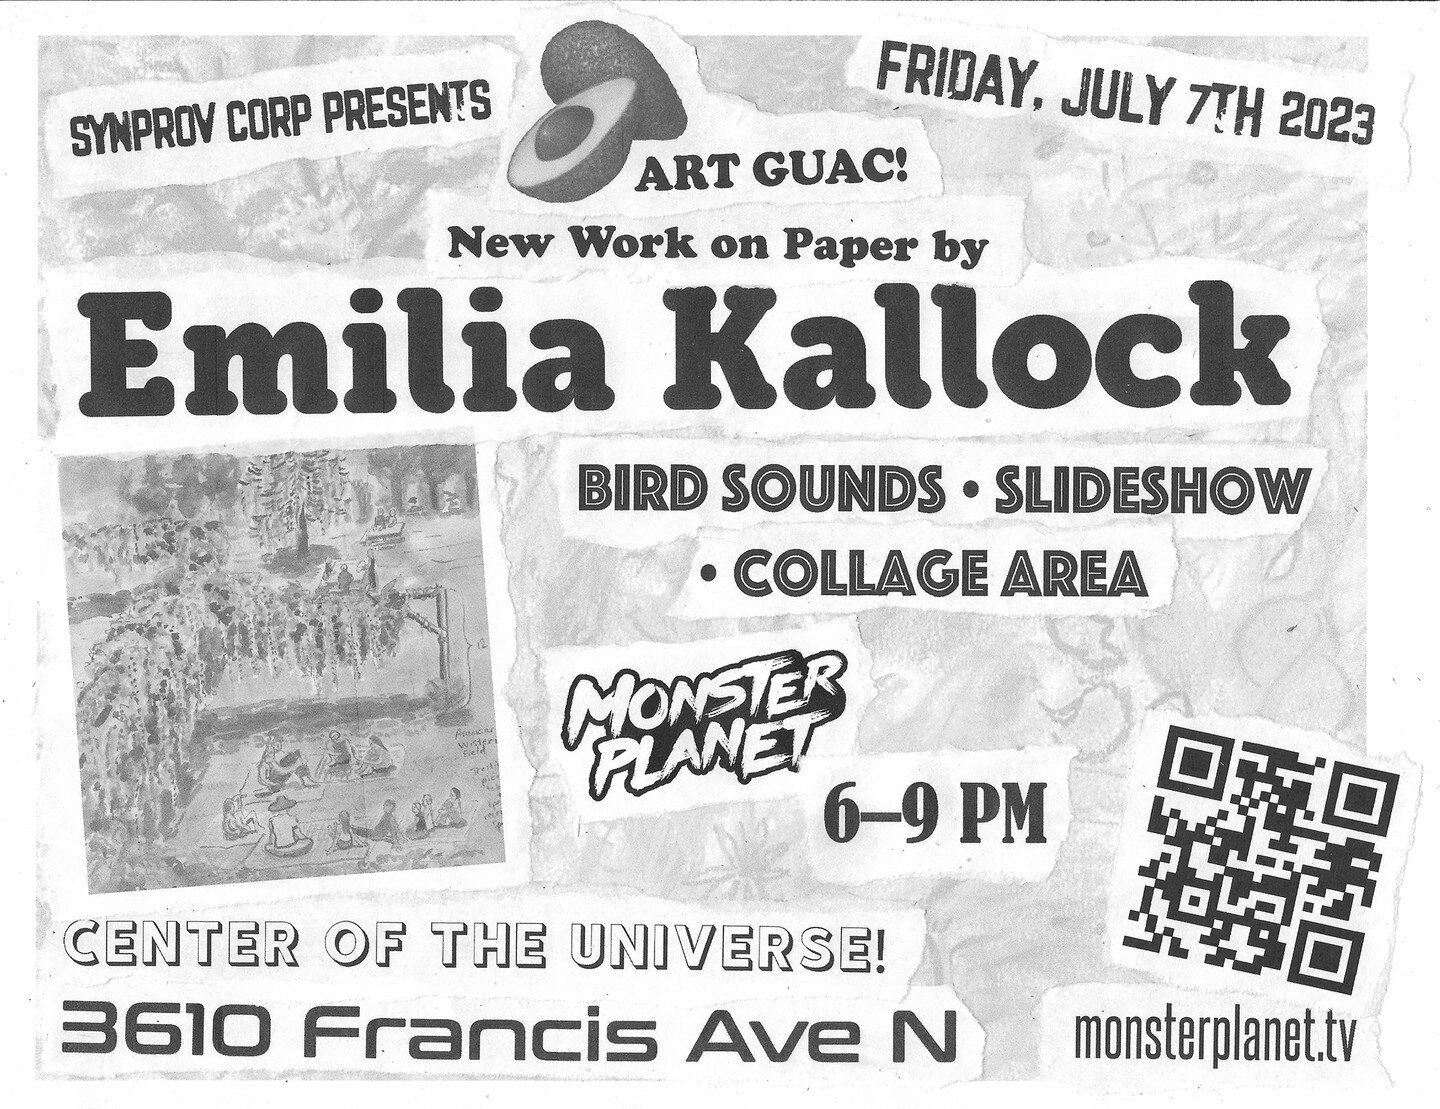 ART GUAC! incoming. Join us in Seattle's Fremont neighborhood for another celebration of art and our creative community. This month, we're featuring Emilia Kallock and their new works on paper, bird sounds, and DIY collage station. #collage #emiliaka